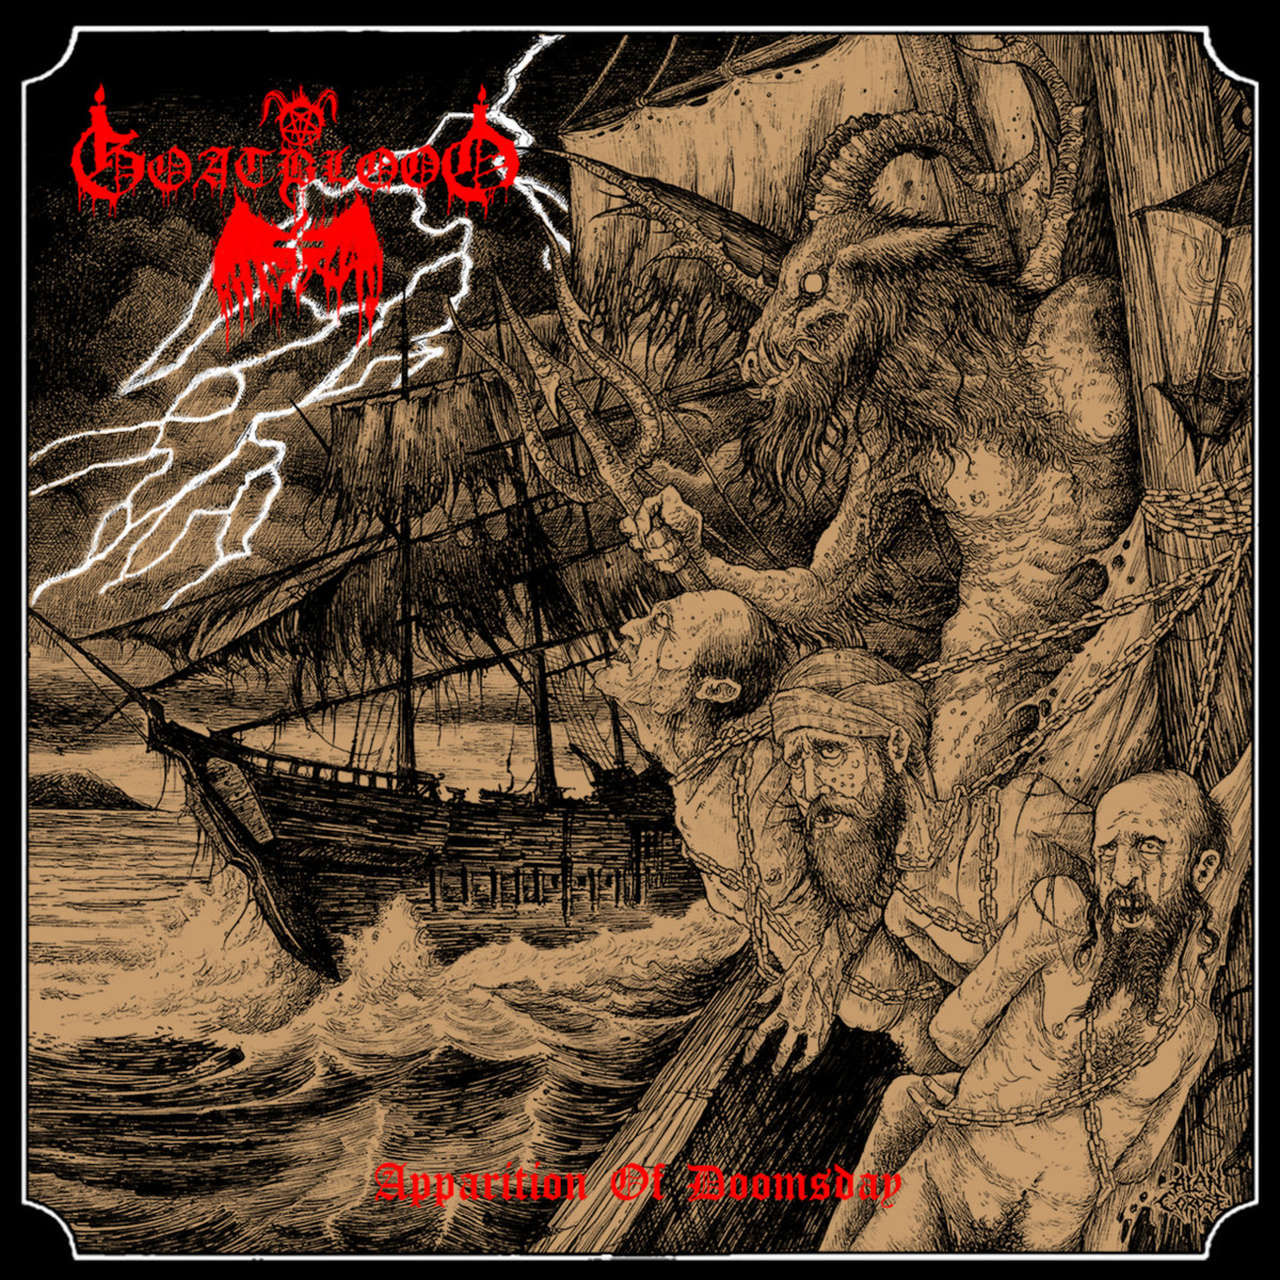 Goatblood - Apparition of Doomsday (CD)